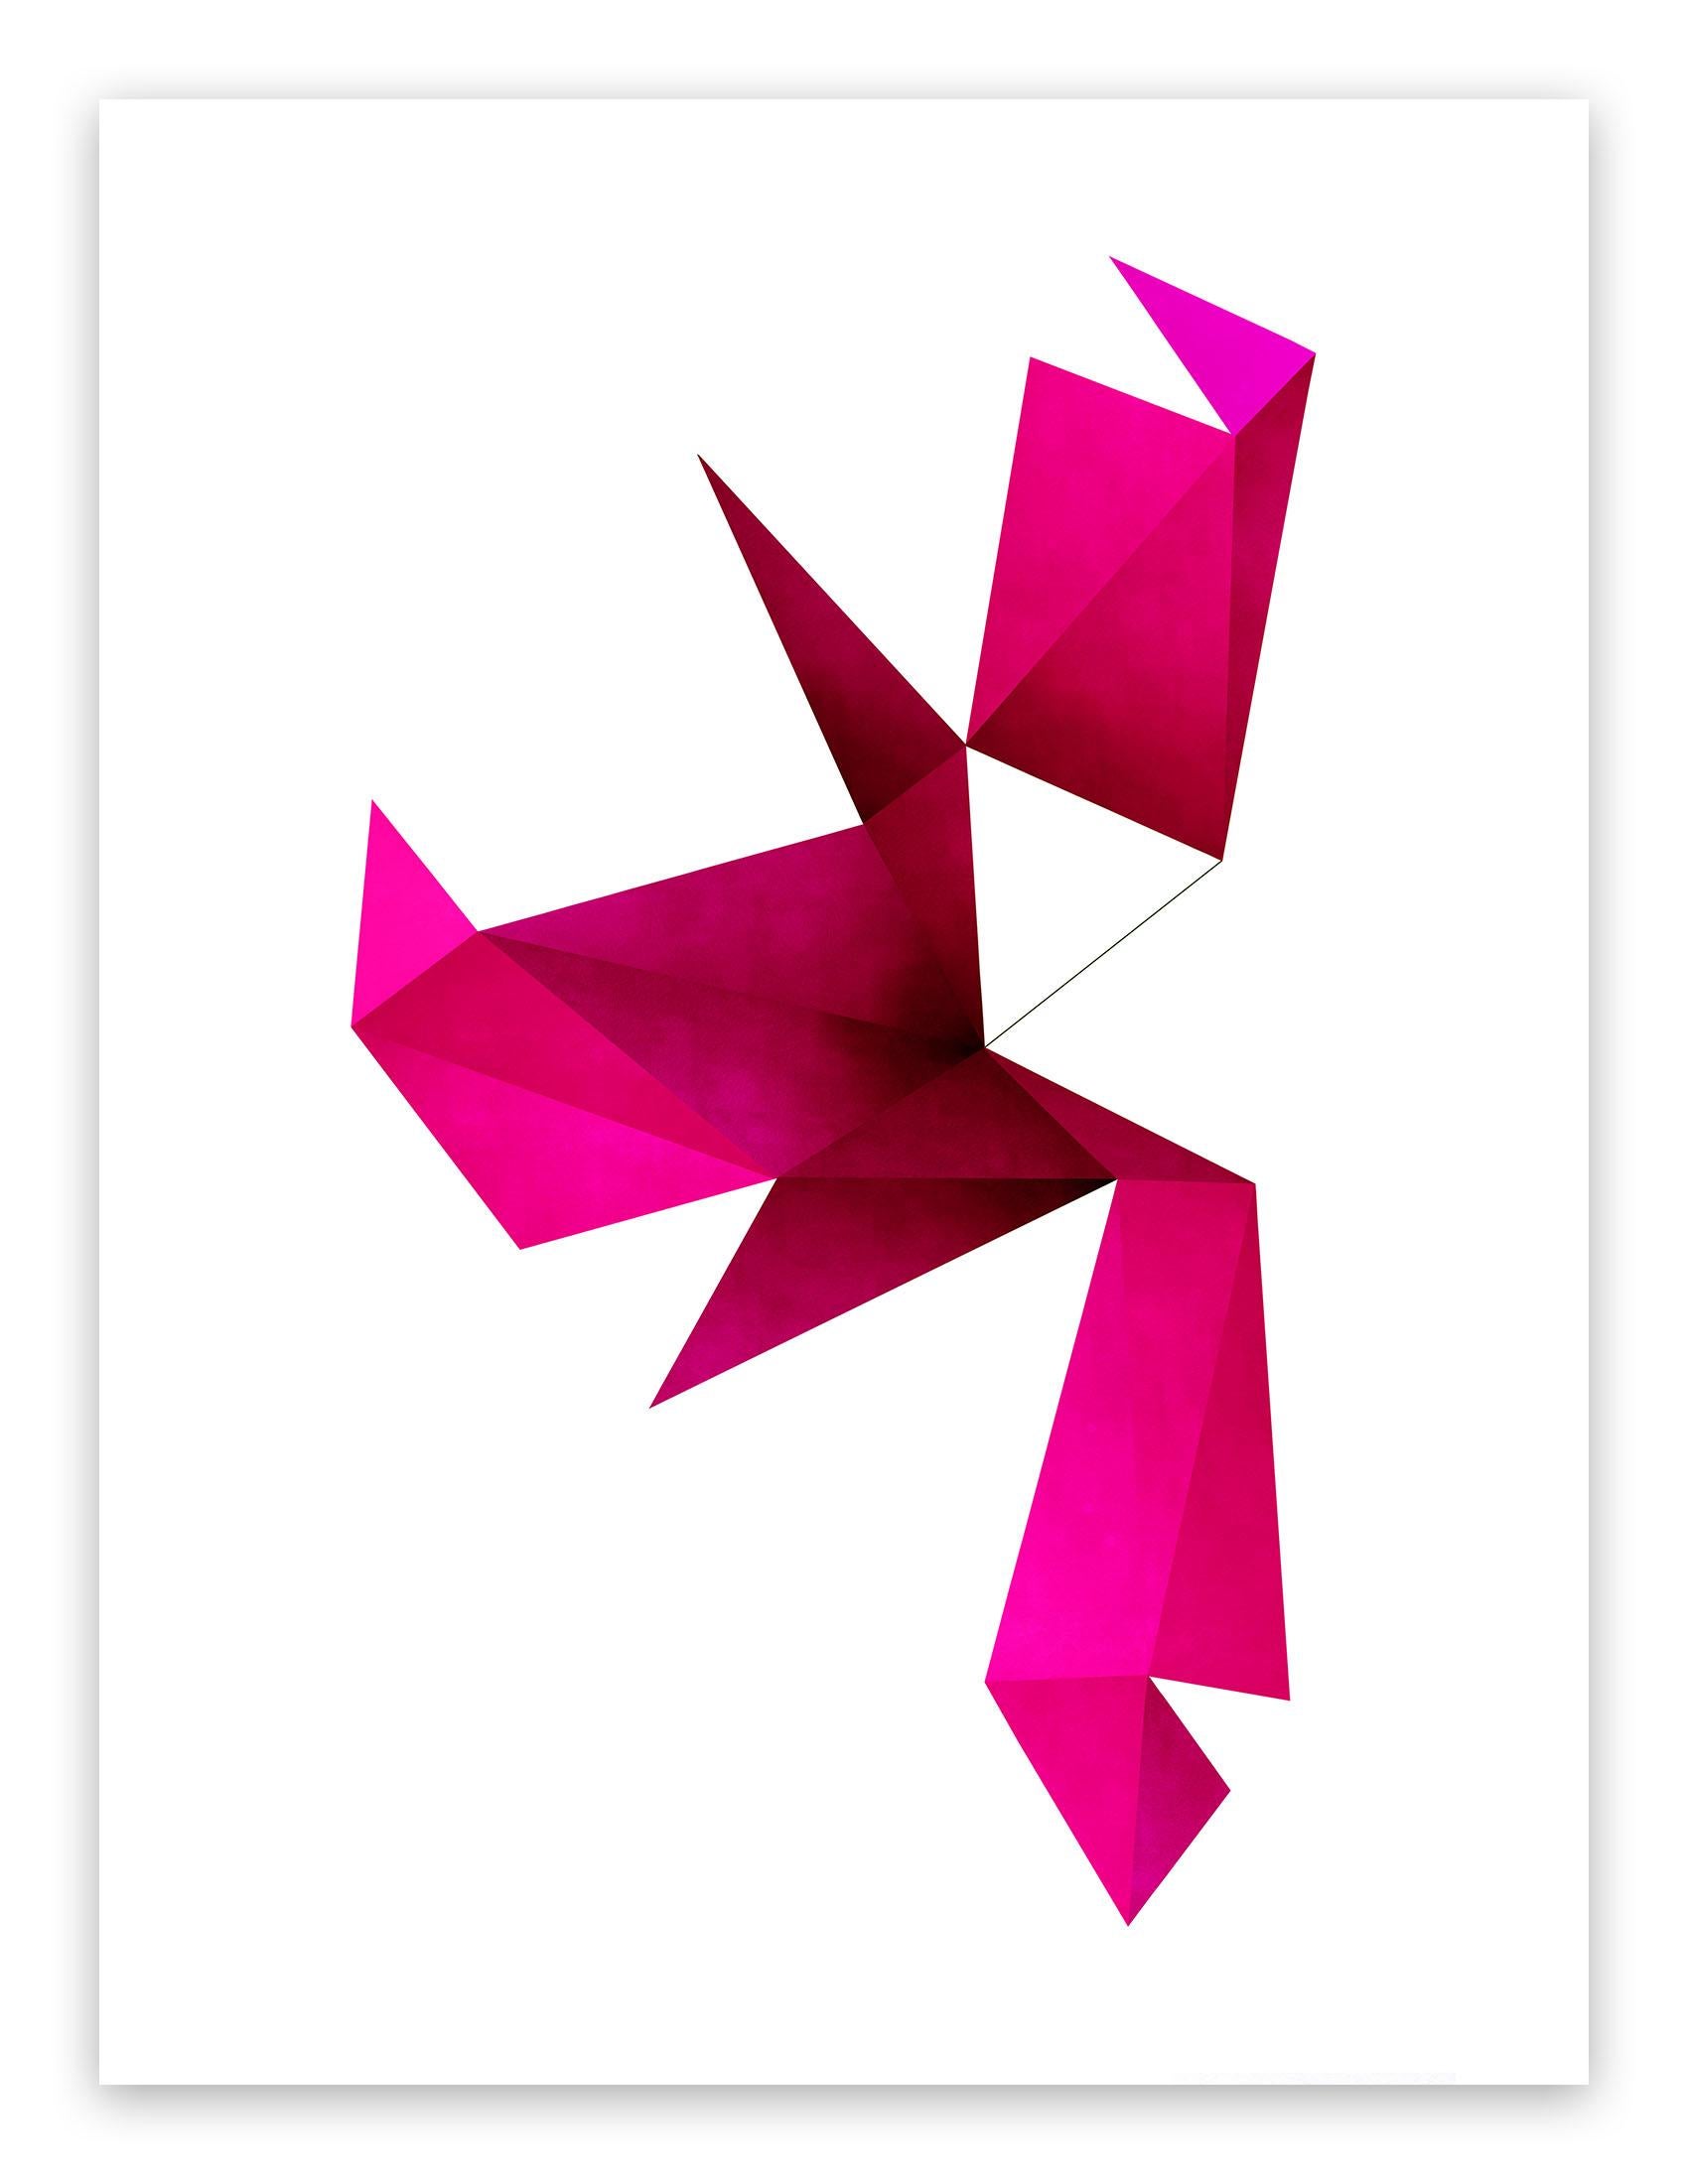 Universals Foldouts 07022012 Pink (Abstract Photography) 

Photographic C Prints, printed on Canson Platinè fiber Rag 310g - Unframed

"Edition of 6 + 2Ap.  Turnaround time 2-3 weeks, printed on demand.

This artwork will be shipped rolled in a